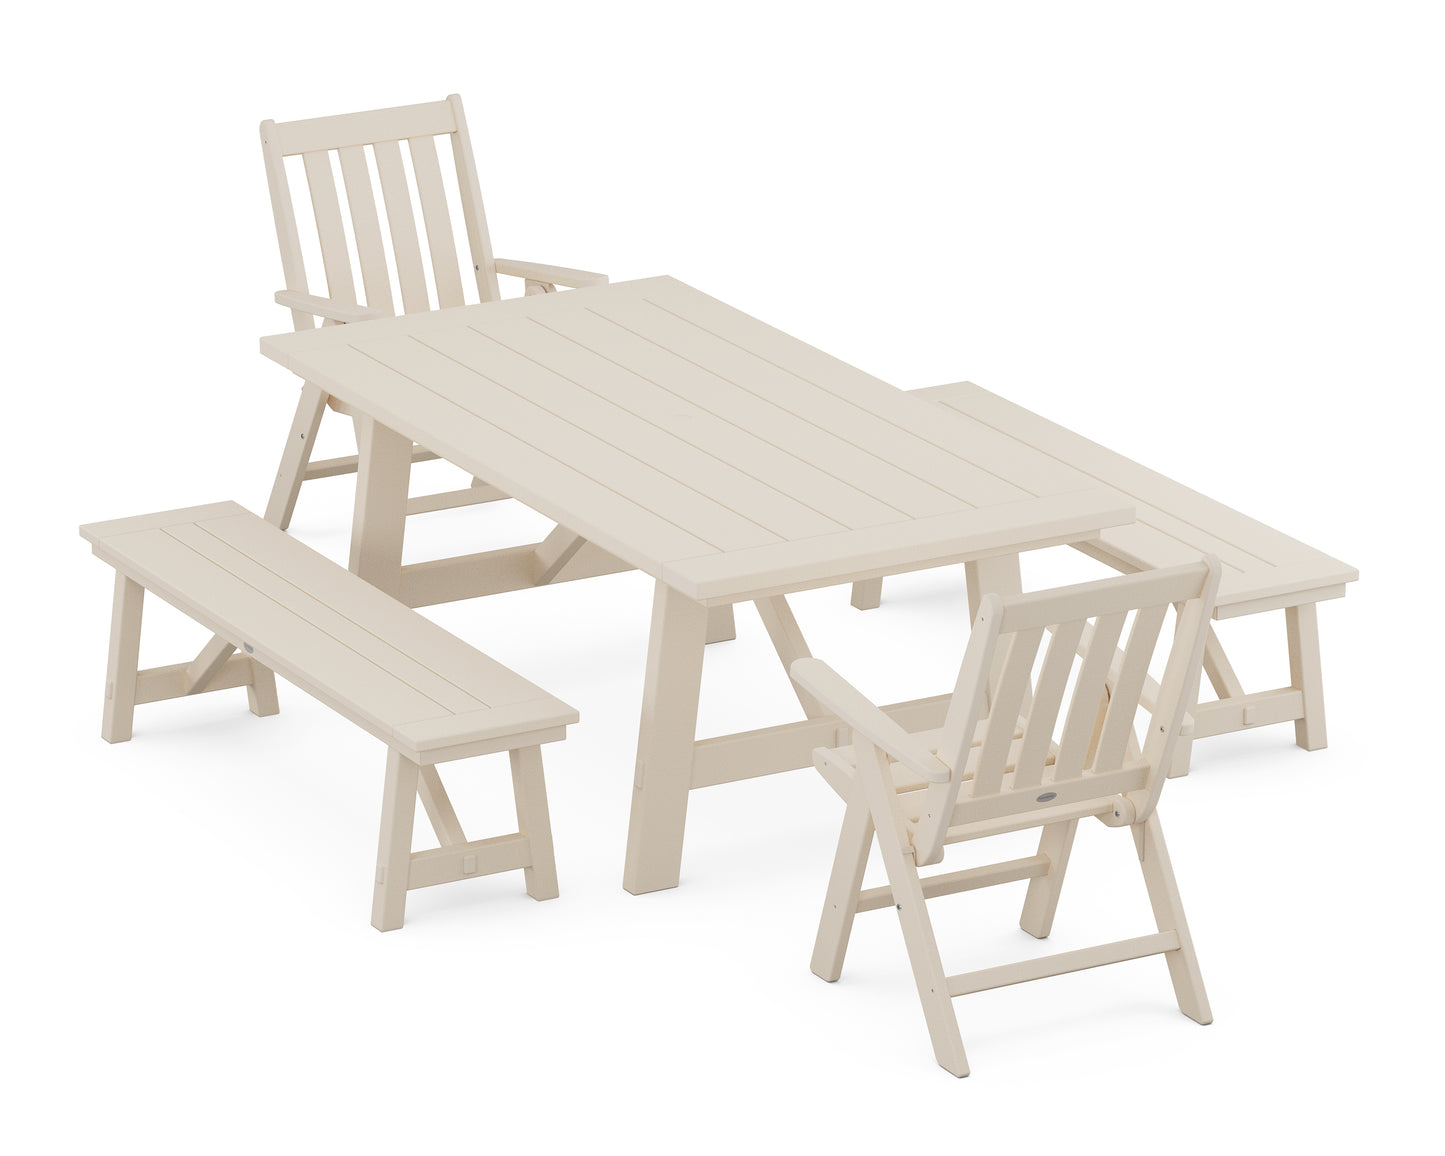 Vineyard Folding Chair 5-Piece Rustic Farmhouse Dining Set With Benches